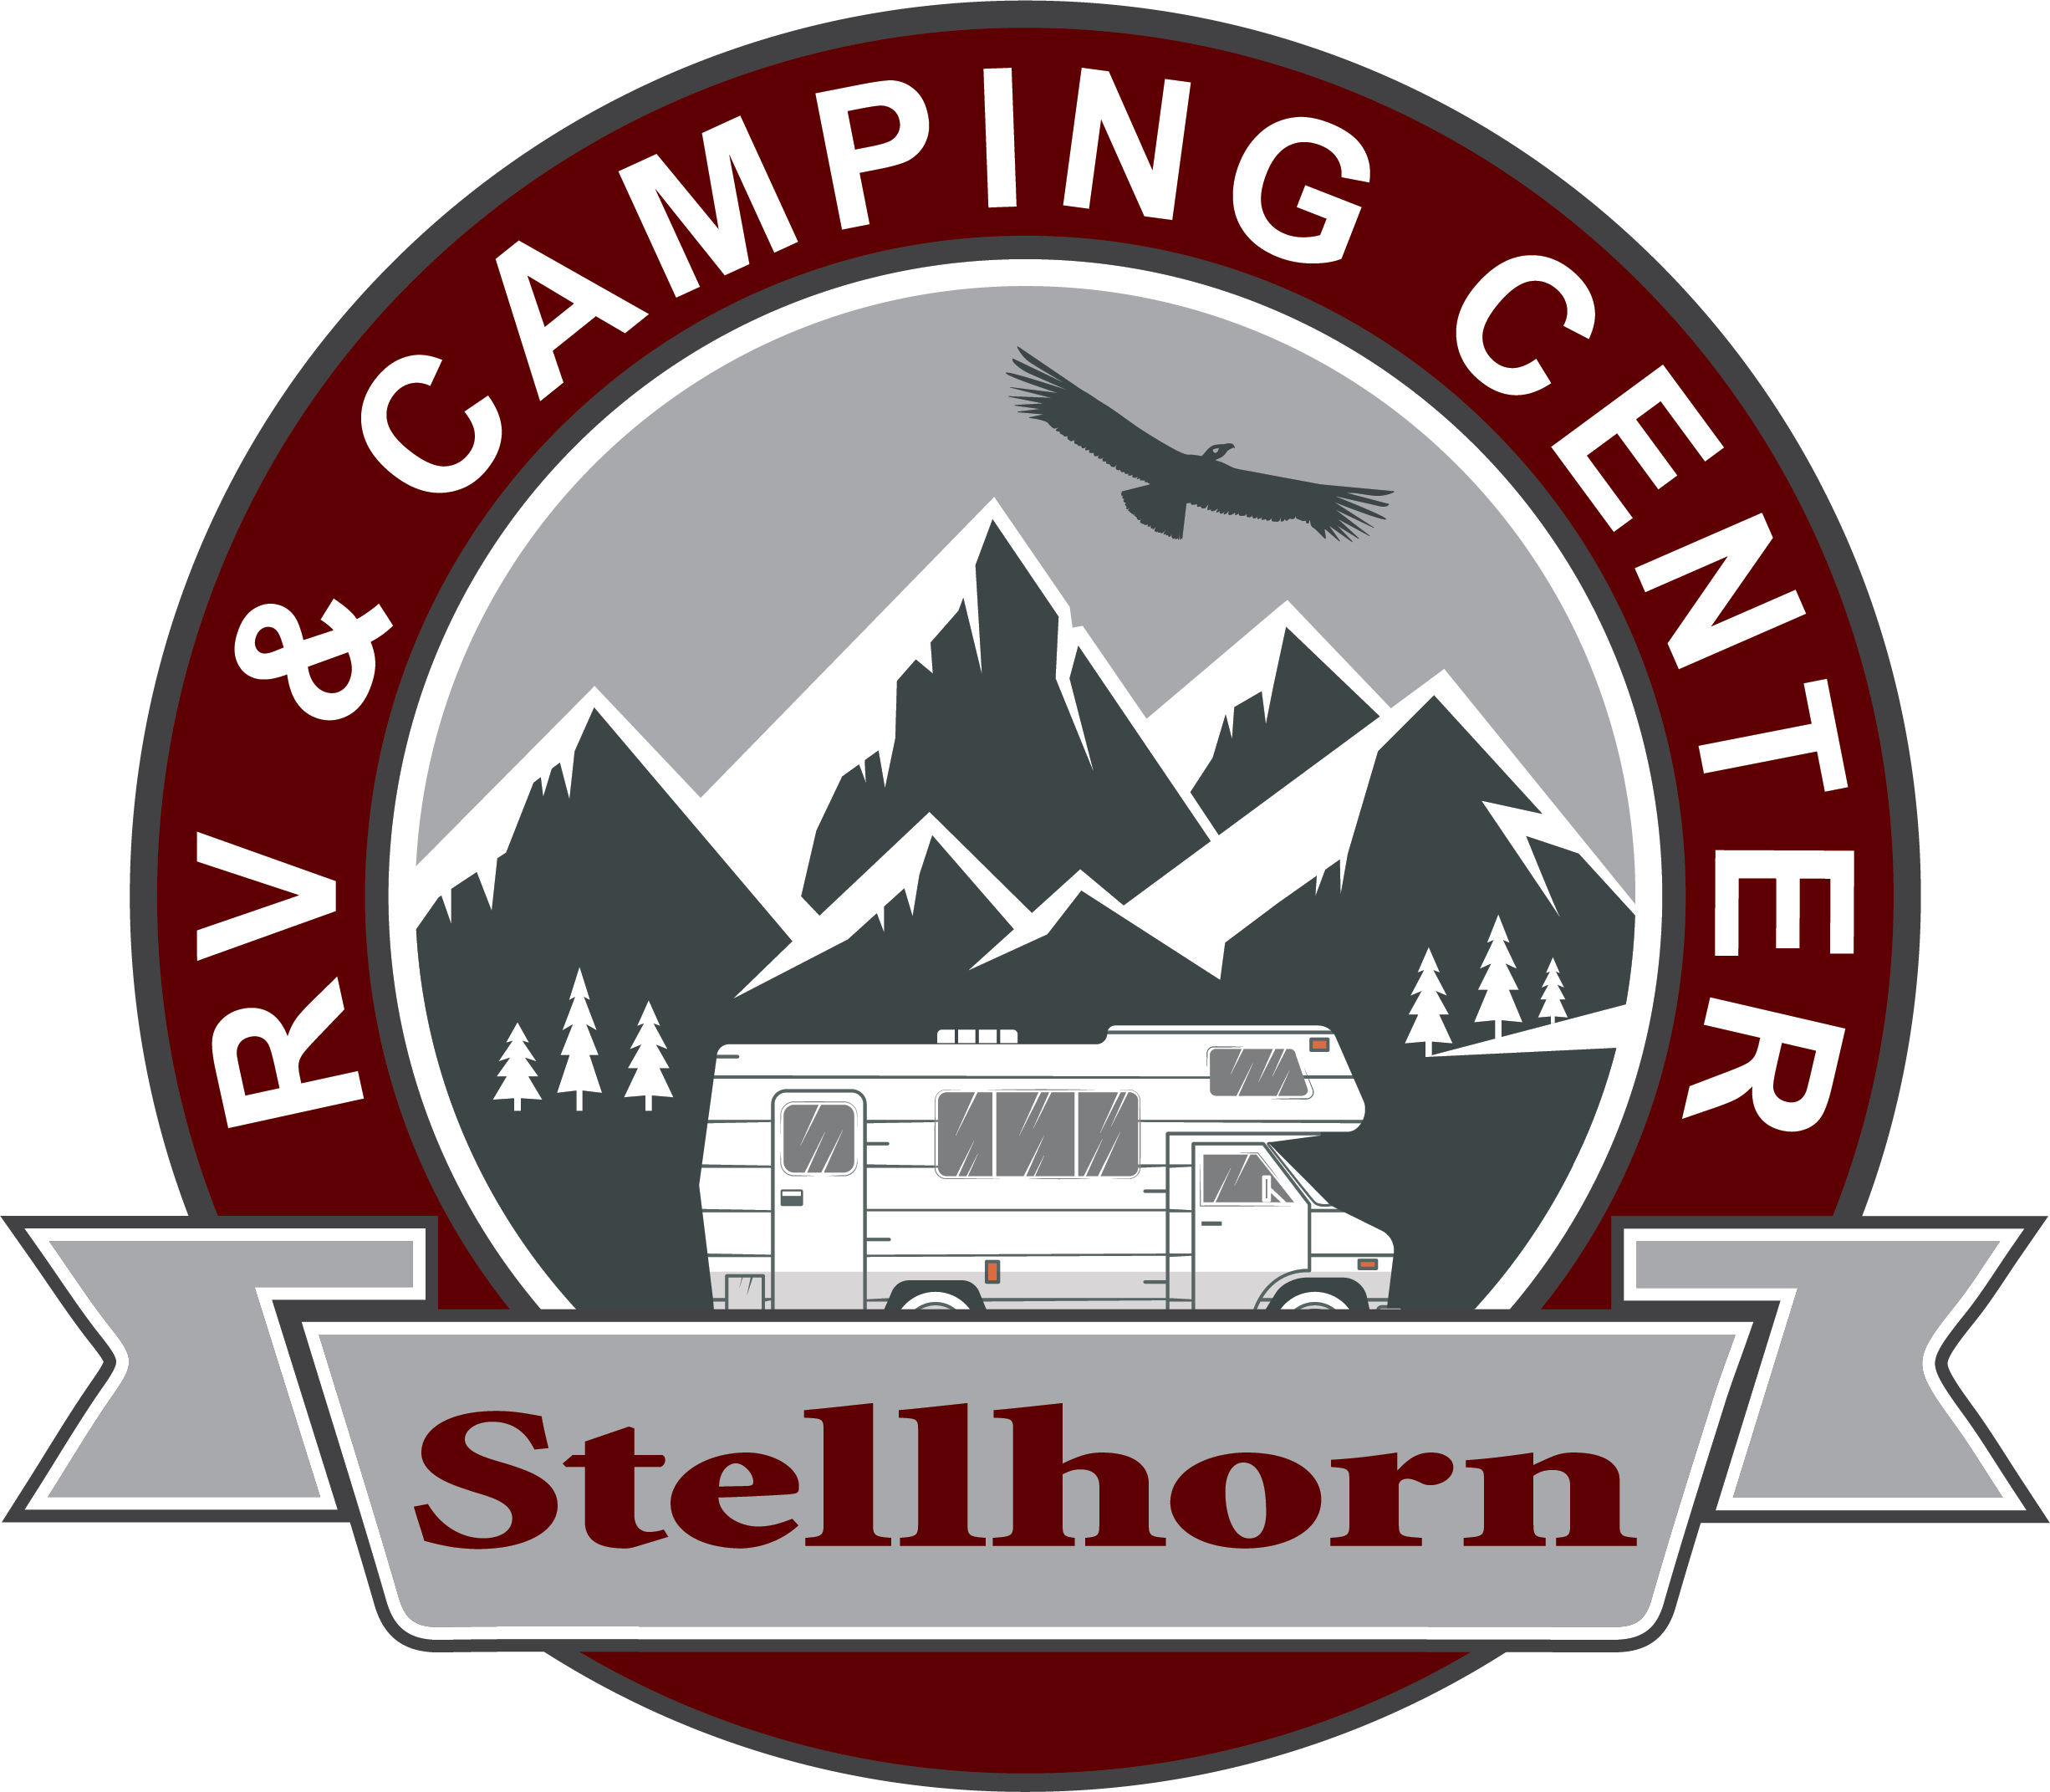 Stellhorn RV and Camping Center